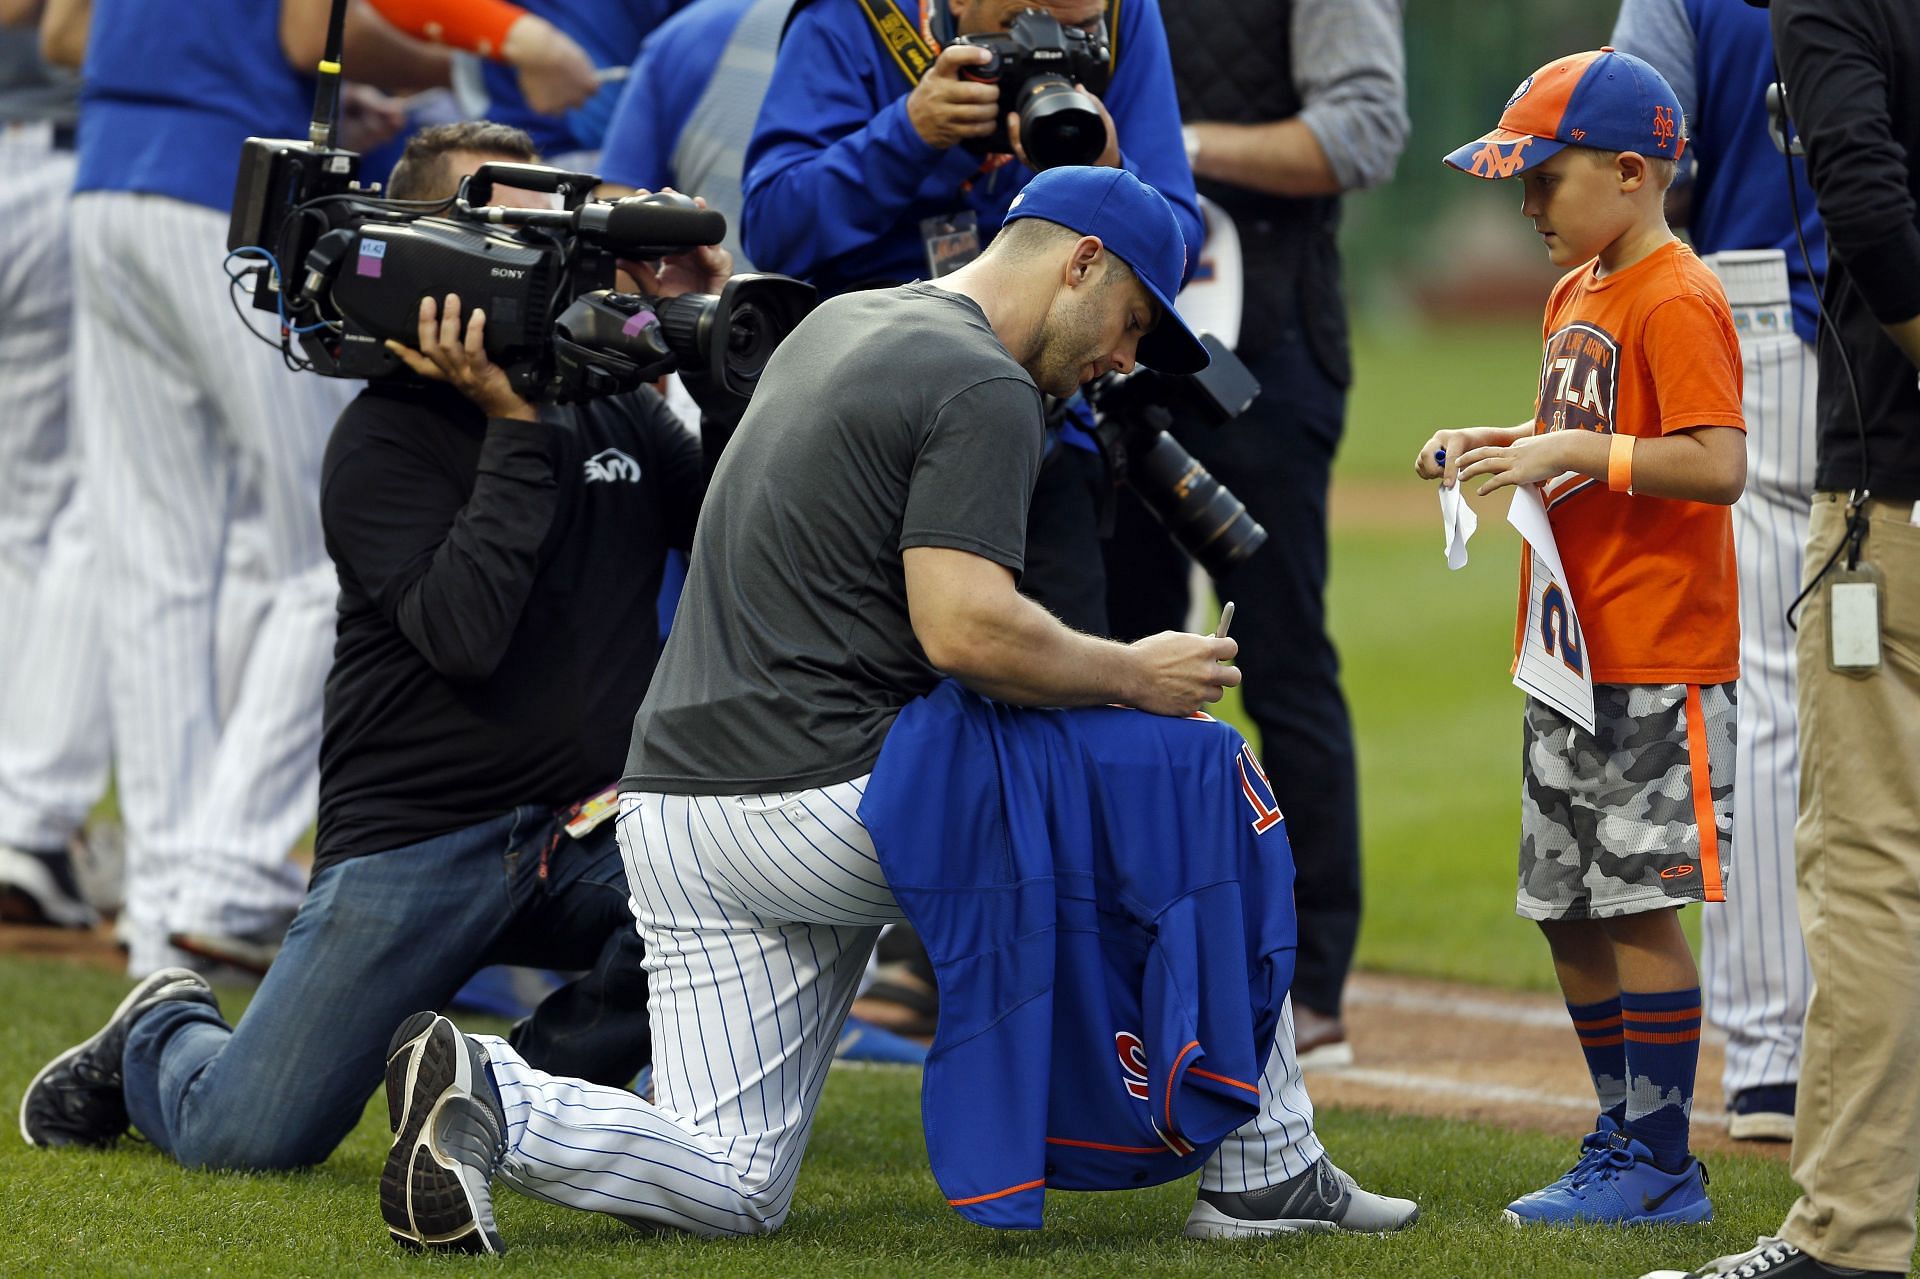 David Wright got engaged to Molly Beers